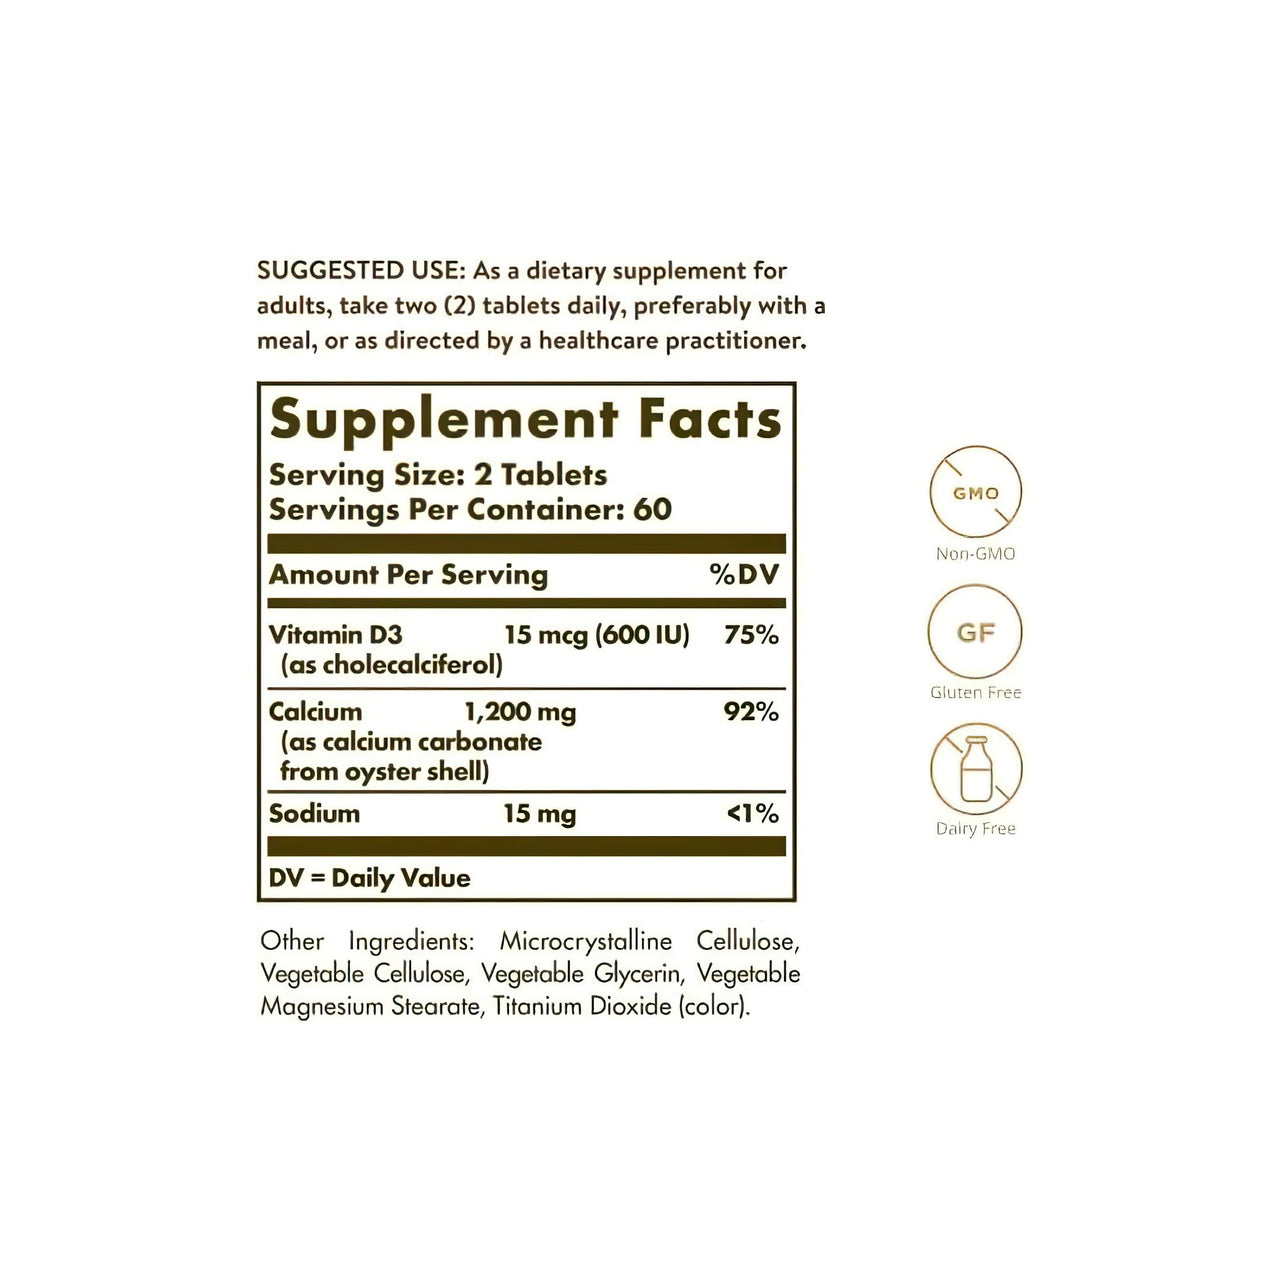 A label for Solgar Calcium "600" 120 tablets (from oyster shell with vitamin D3) supplement with a list of ingredients.